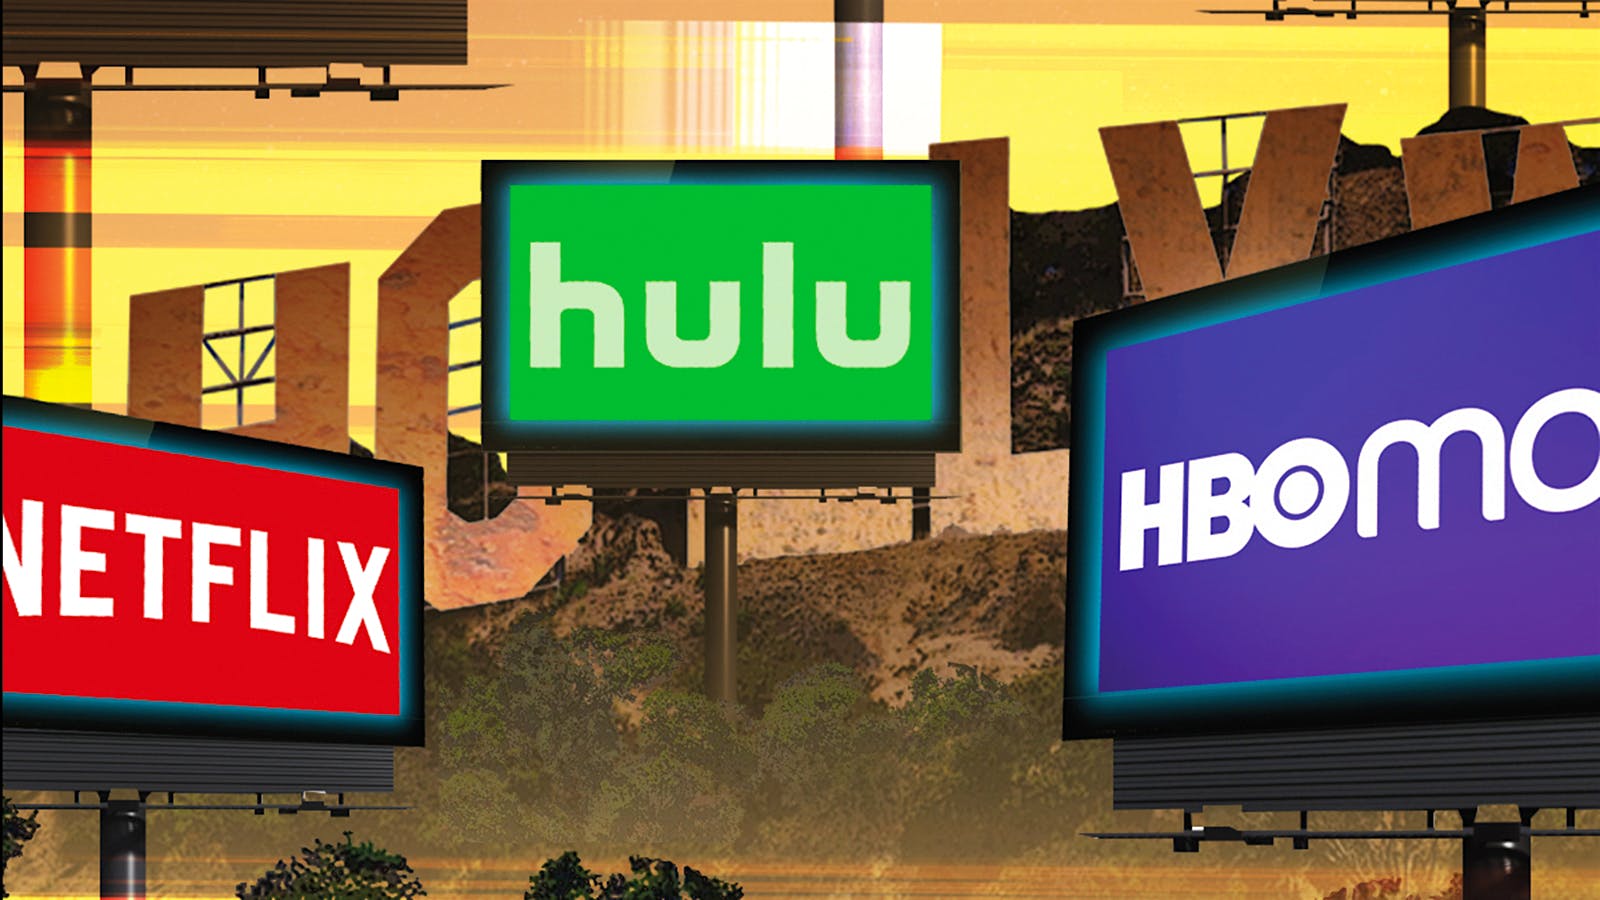 How HBO Max Displaced Netflix in Our Streamer Power Rankings